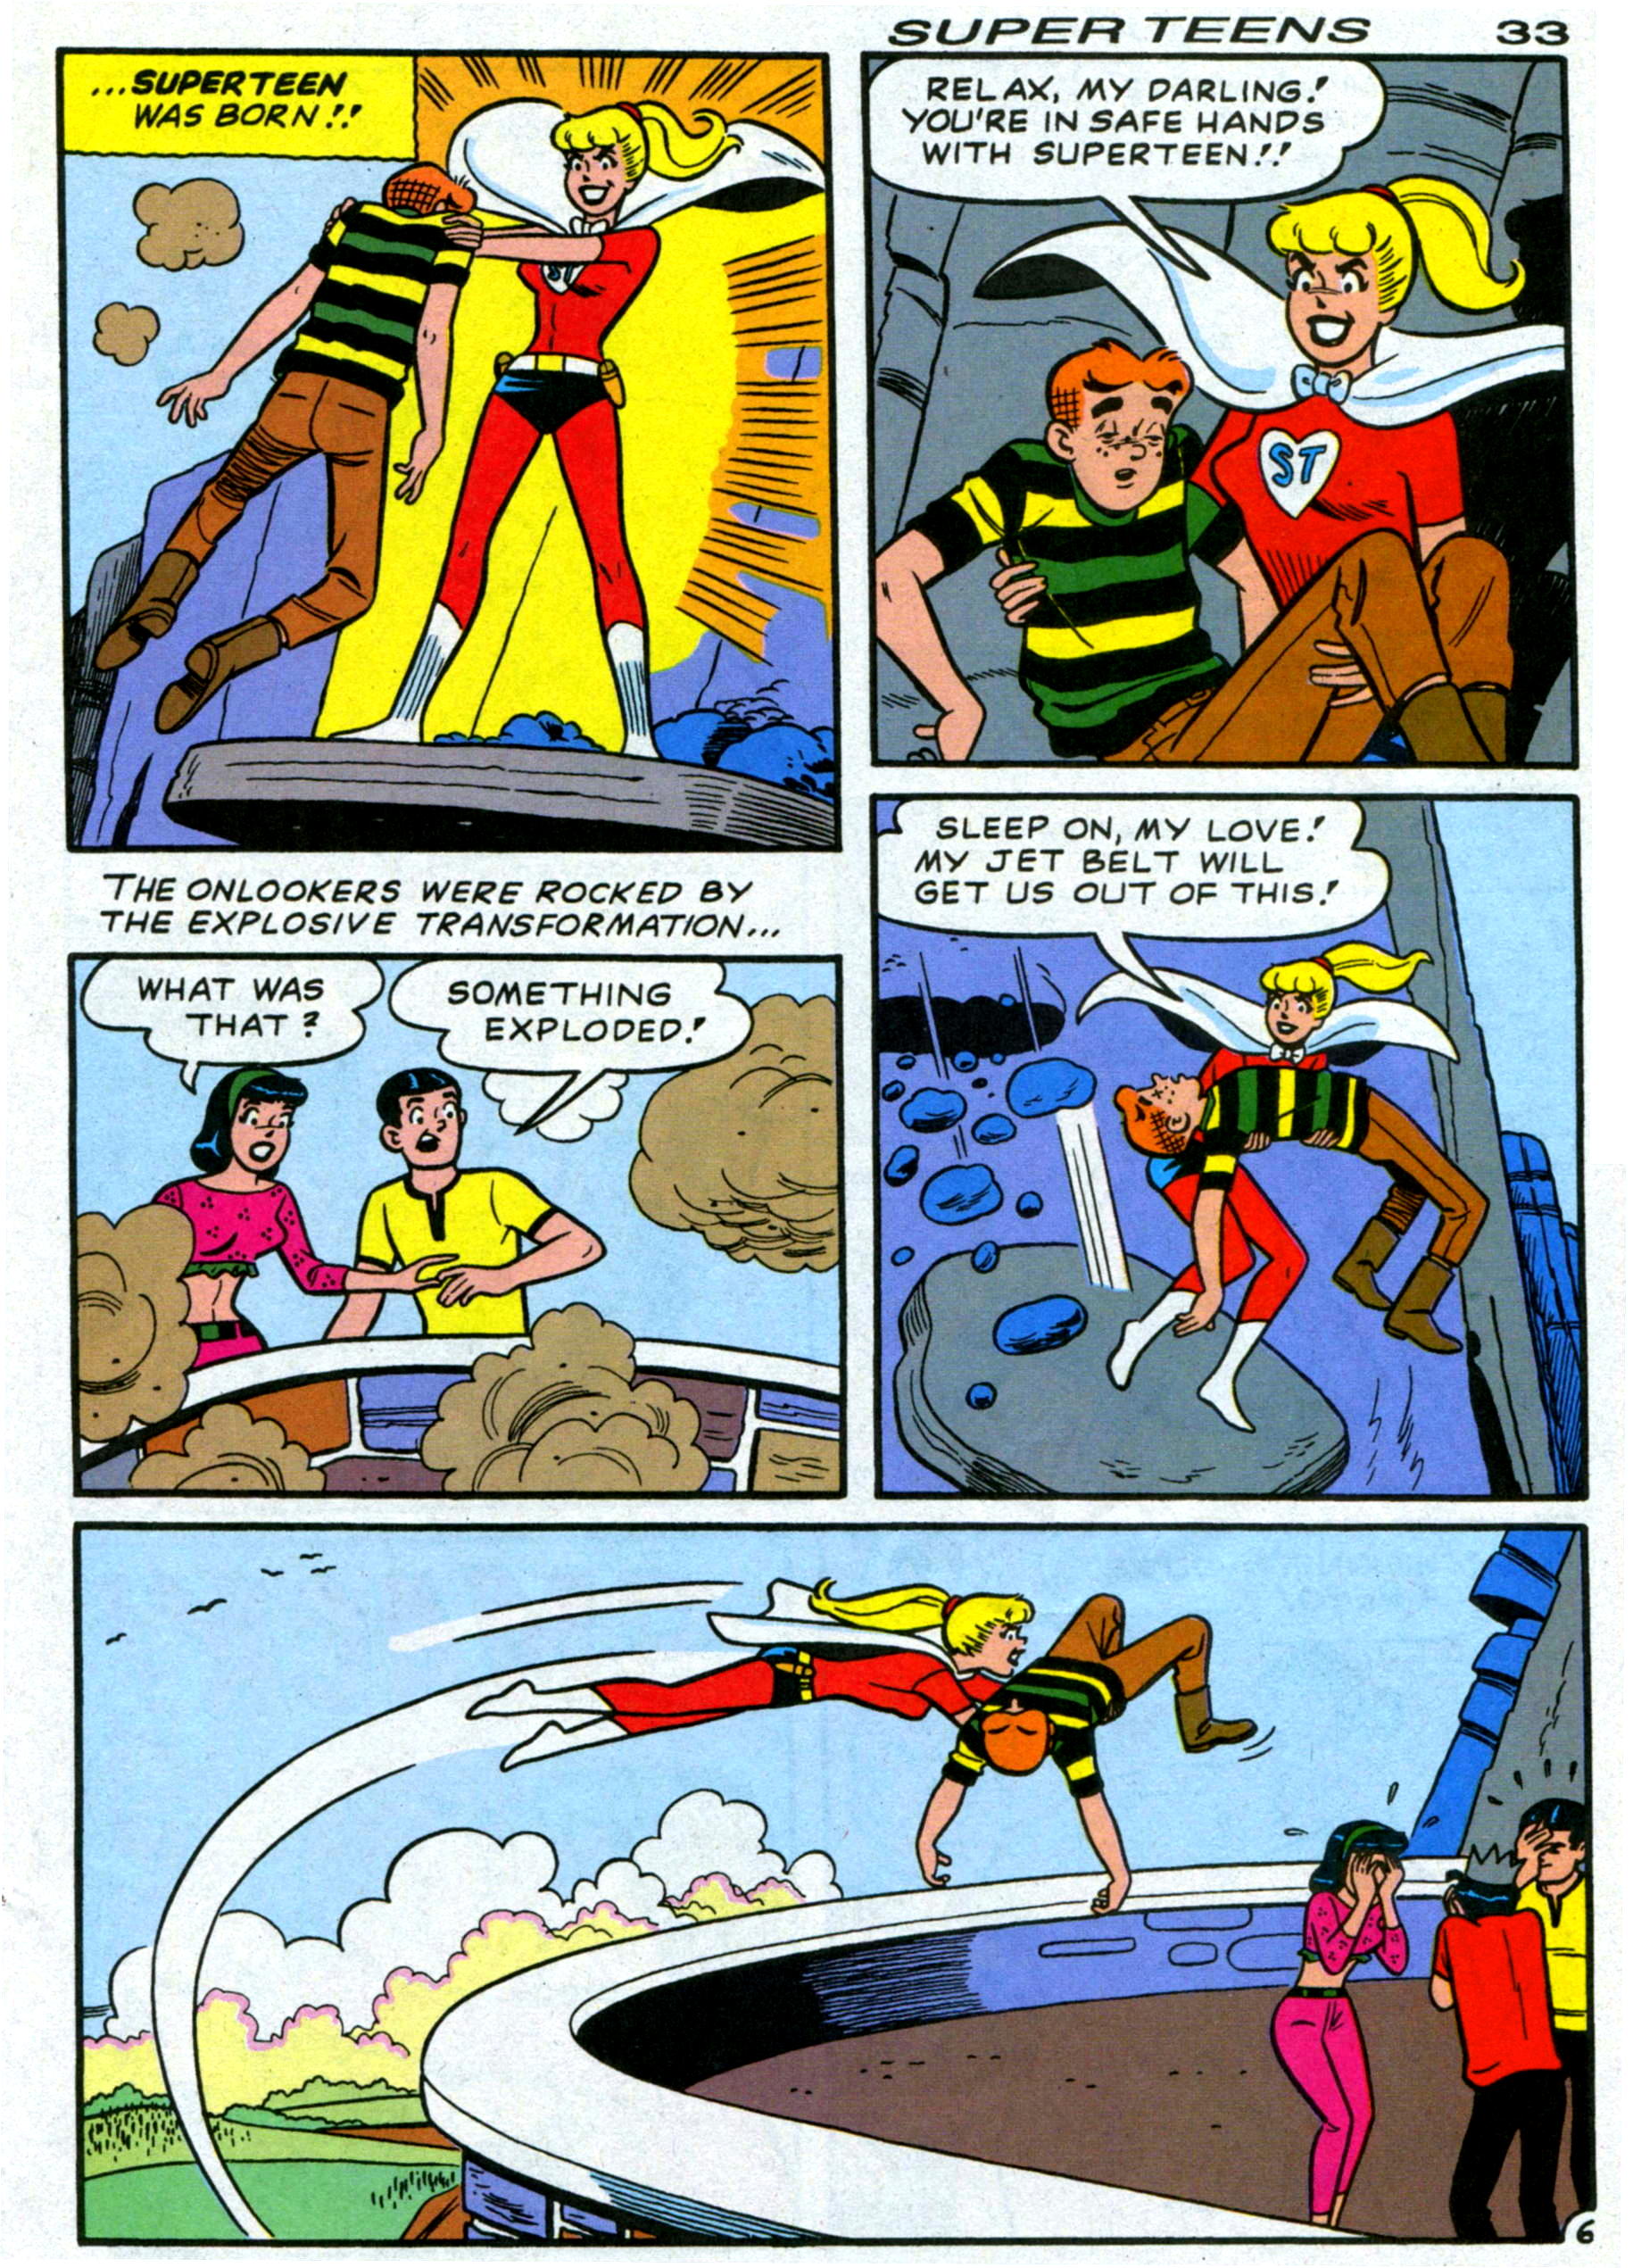 Read online Archie's Super Teens comic -  Issue #1 - 35